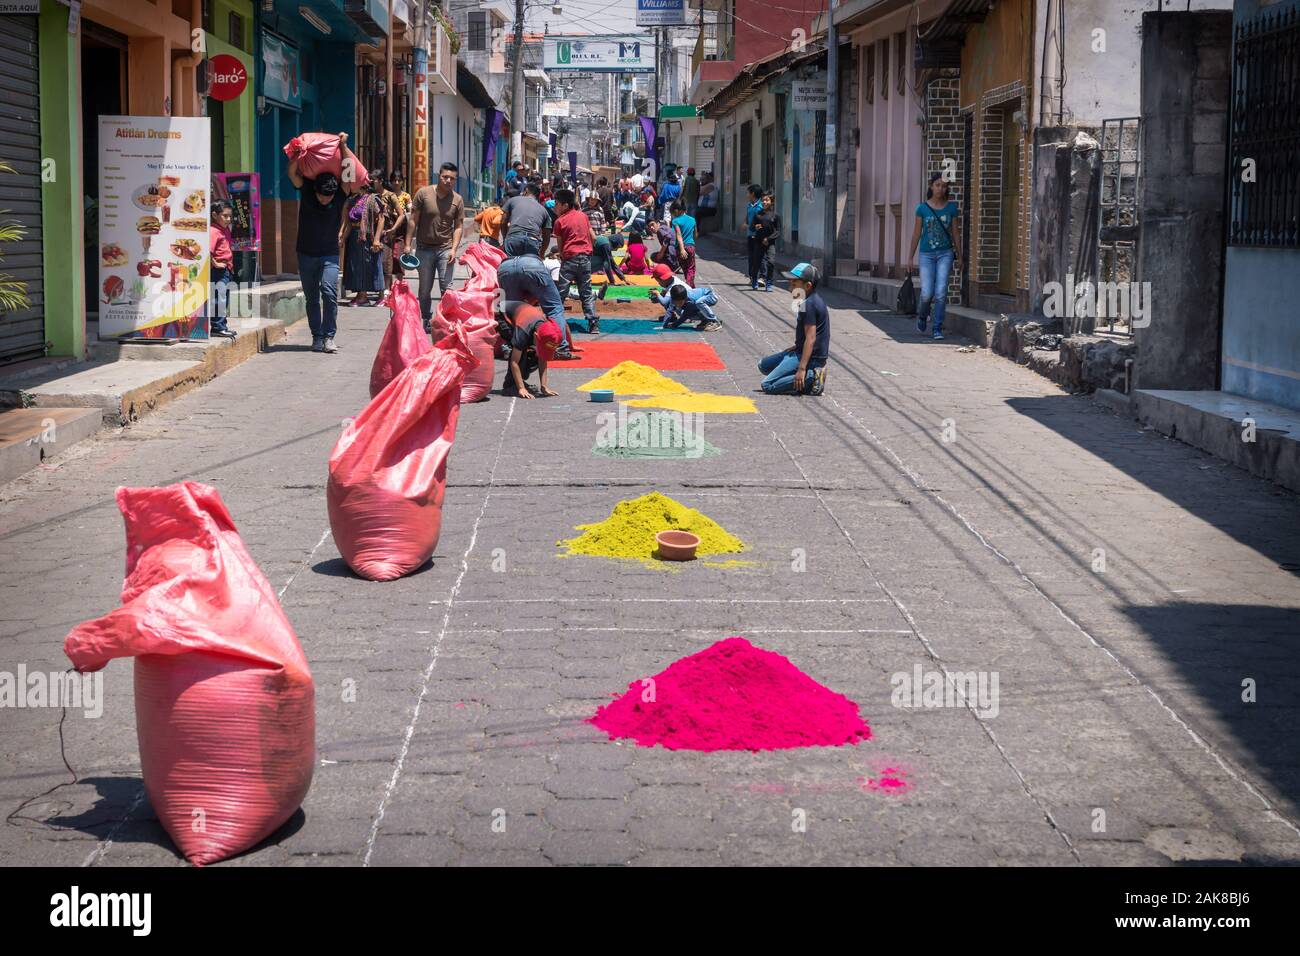 Santiago Atitlan, Guatemala - 30 March 2018: Local people making alfombra from colorful sawdust heaps for Semana Santa, Easter on the street Stock Photo